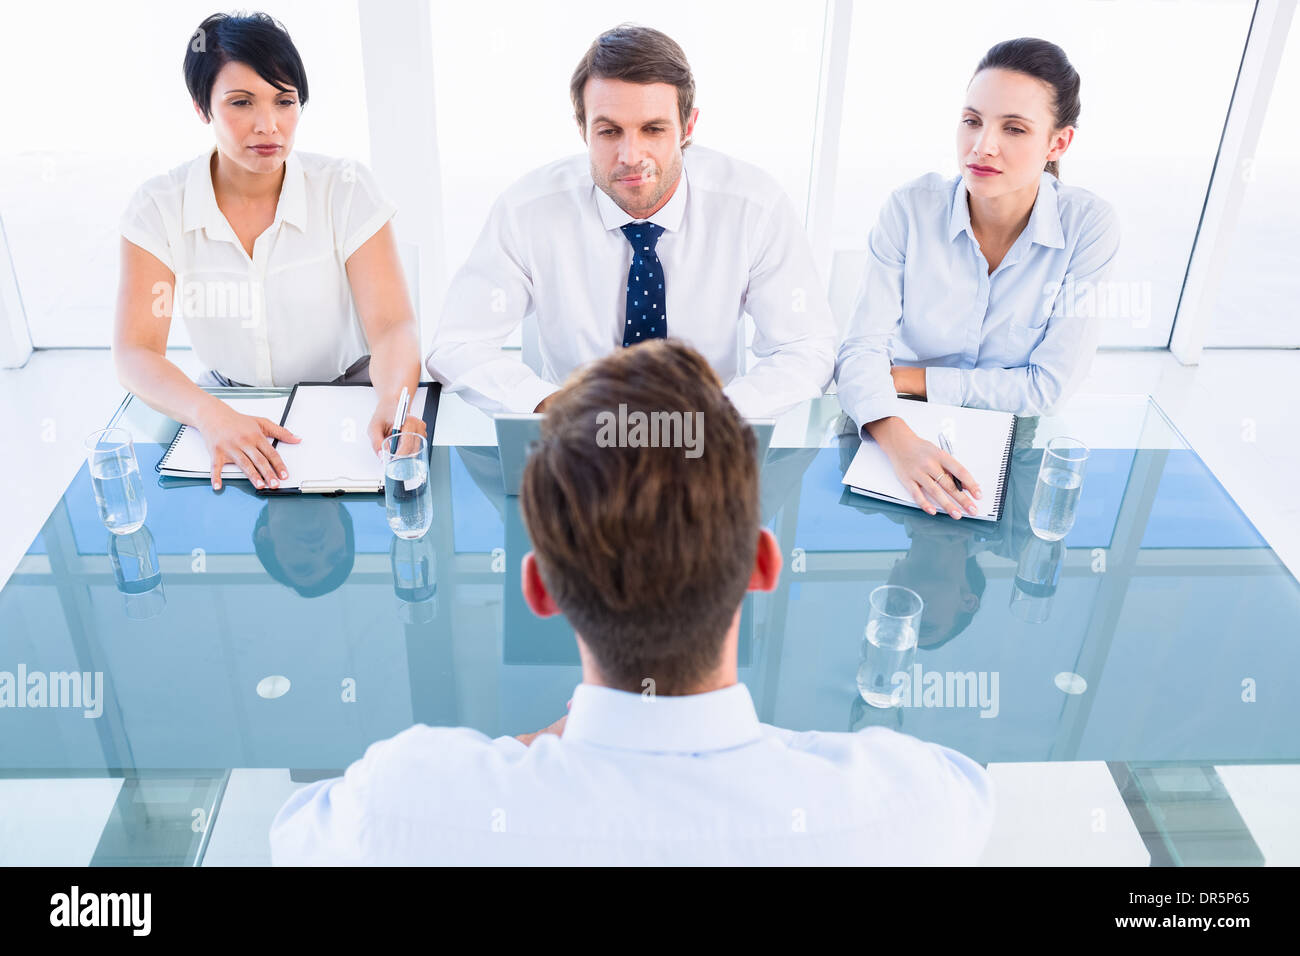 Recruiters checking the candidate during job interview Banque D'Images